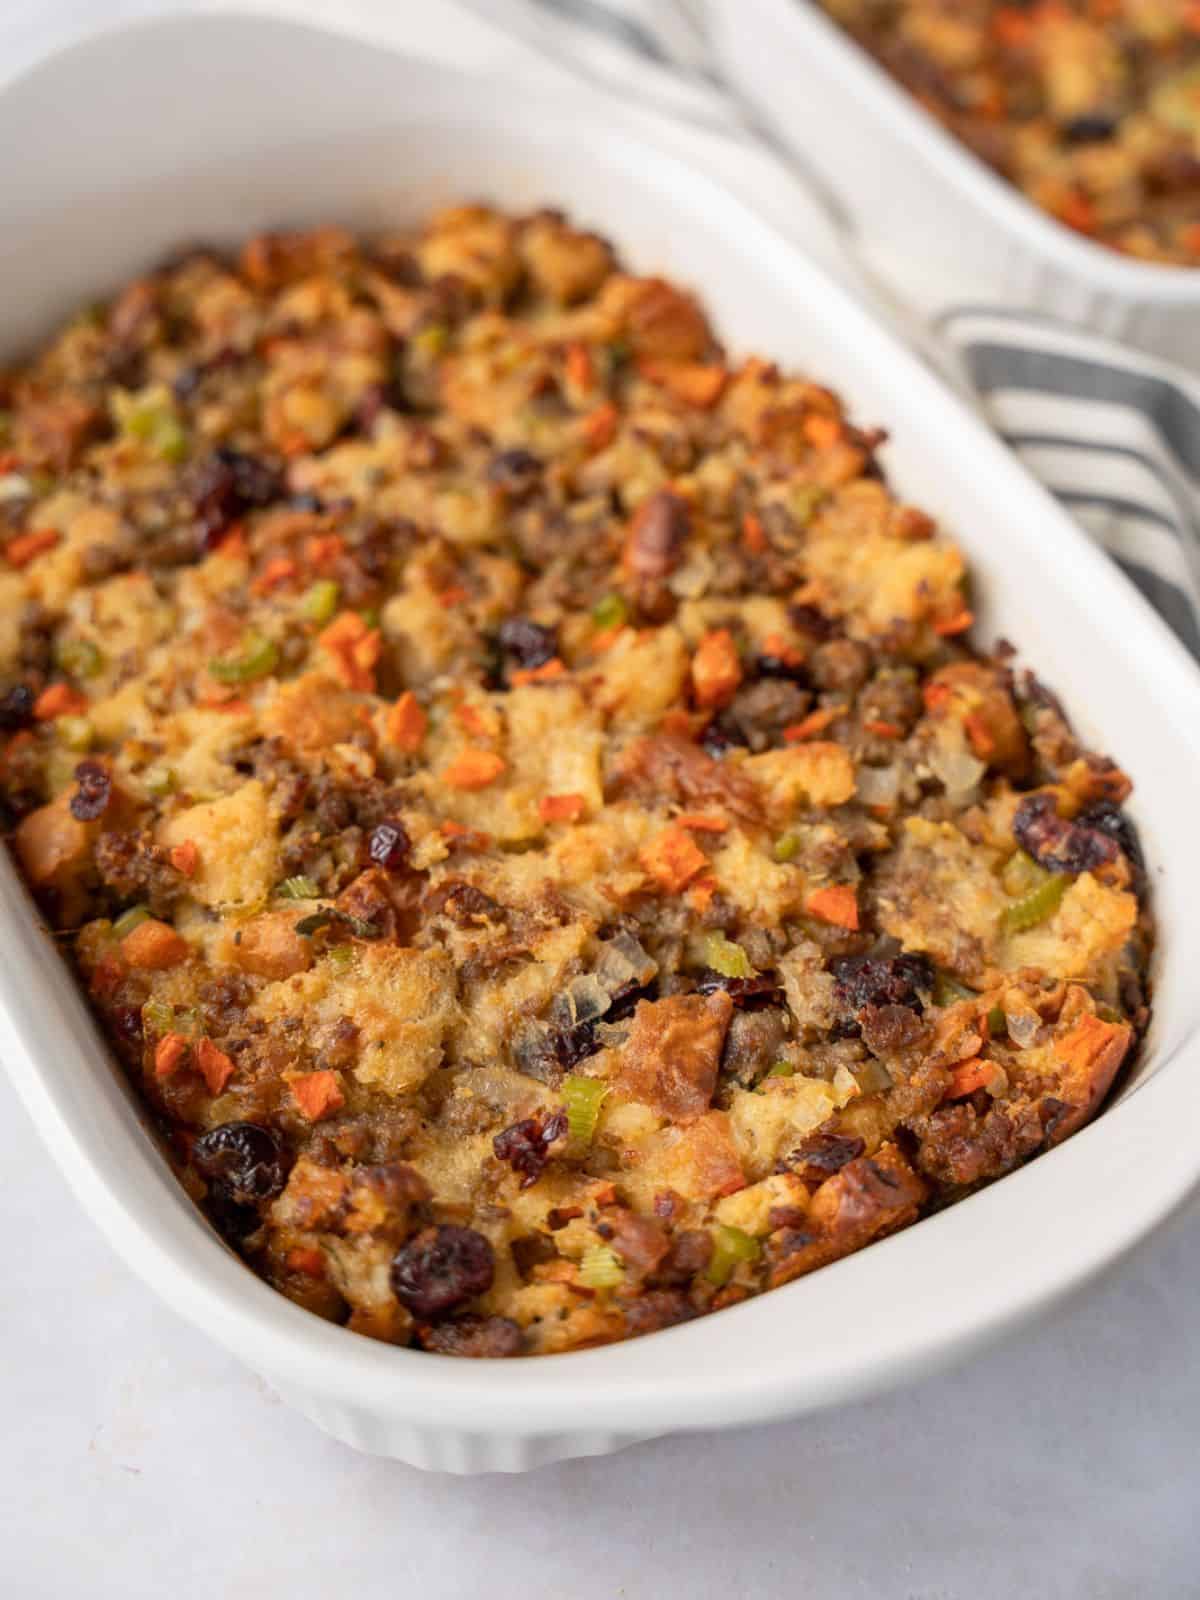 Stuffing in a large white casserole dish.